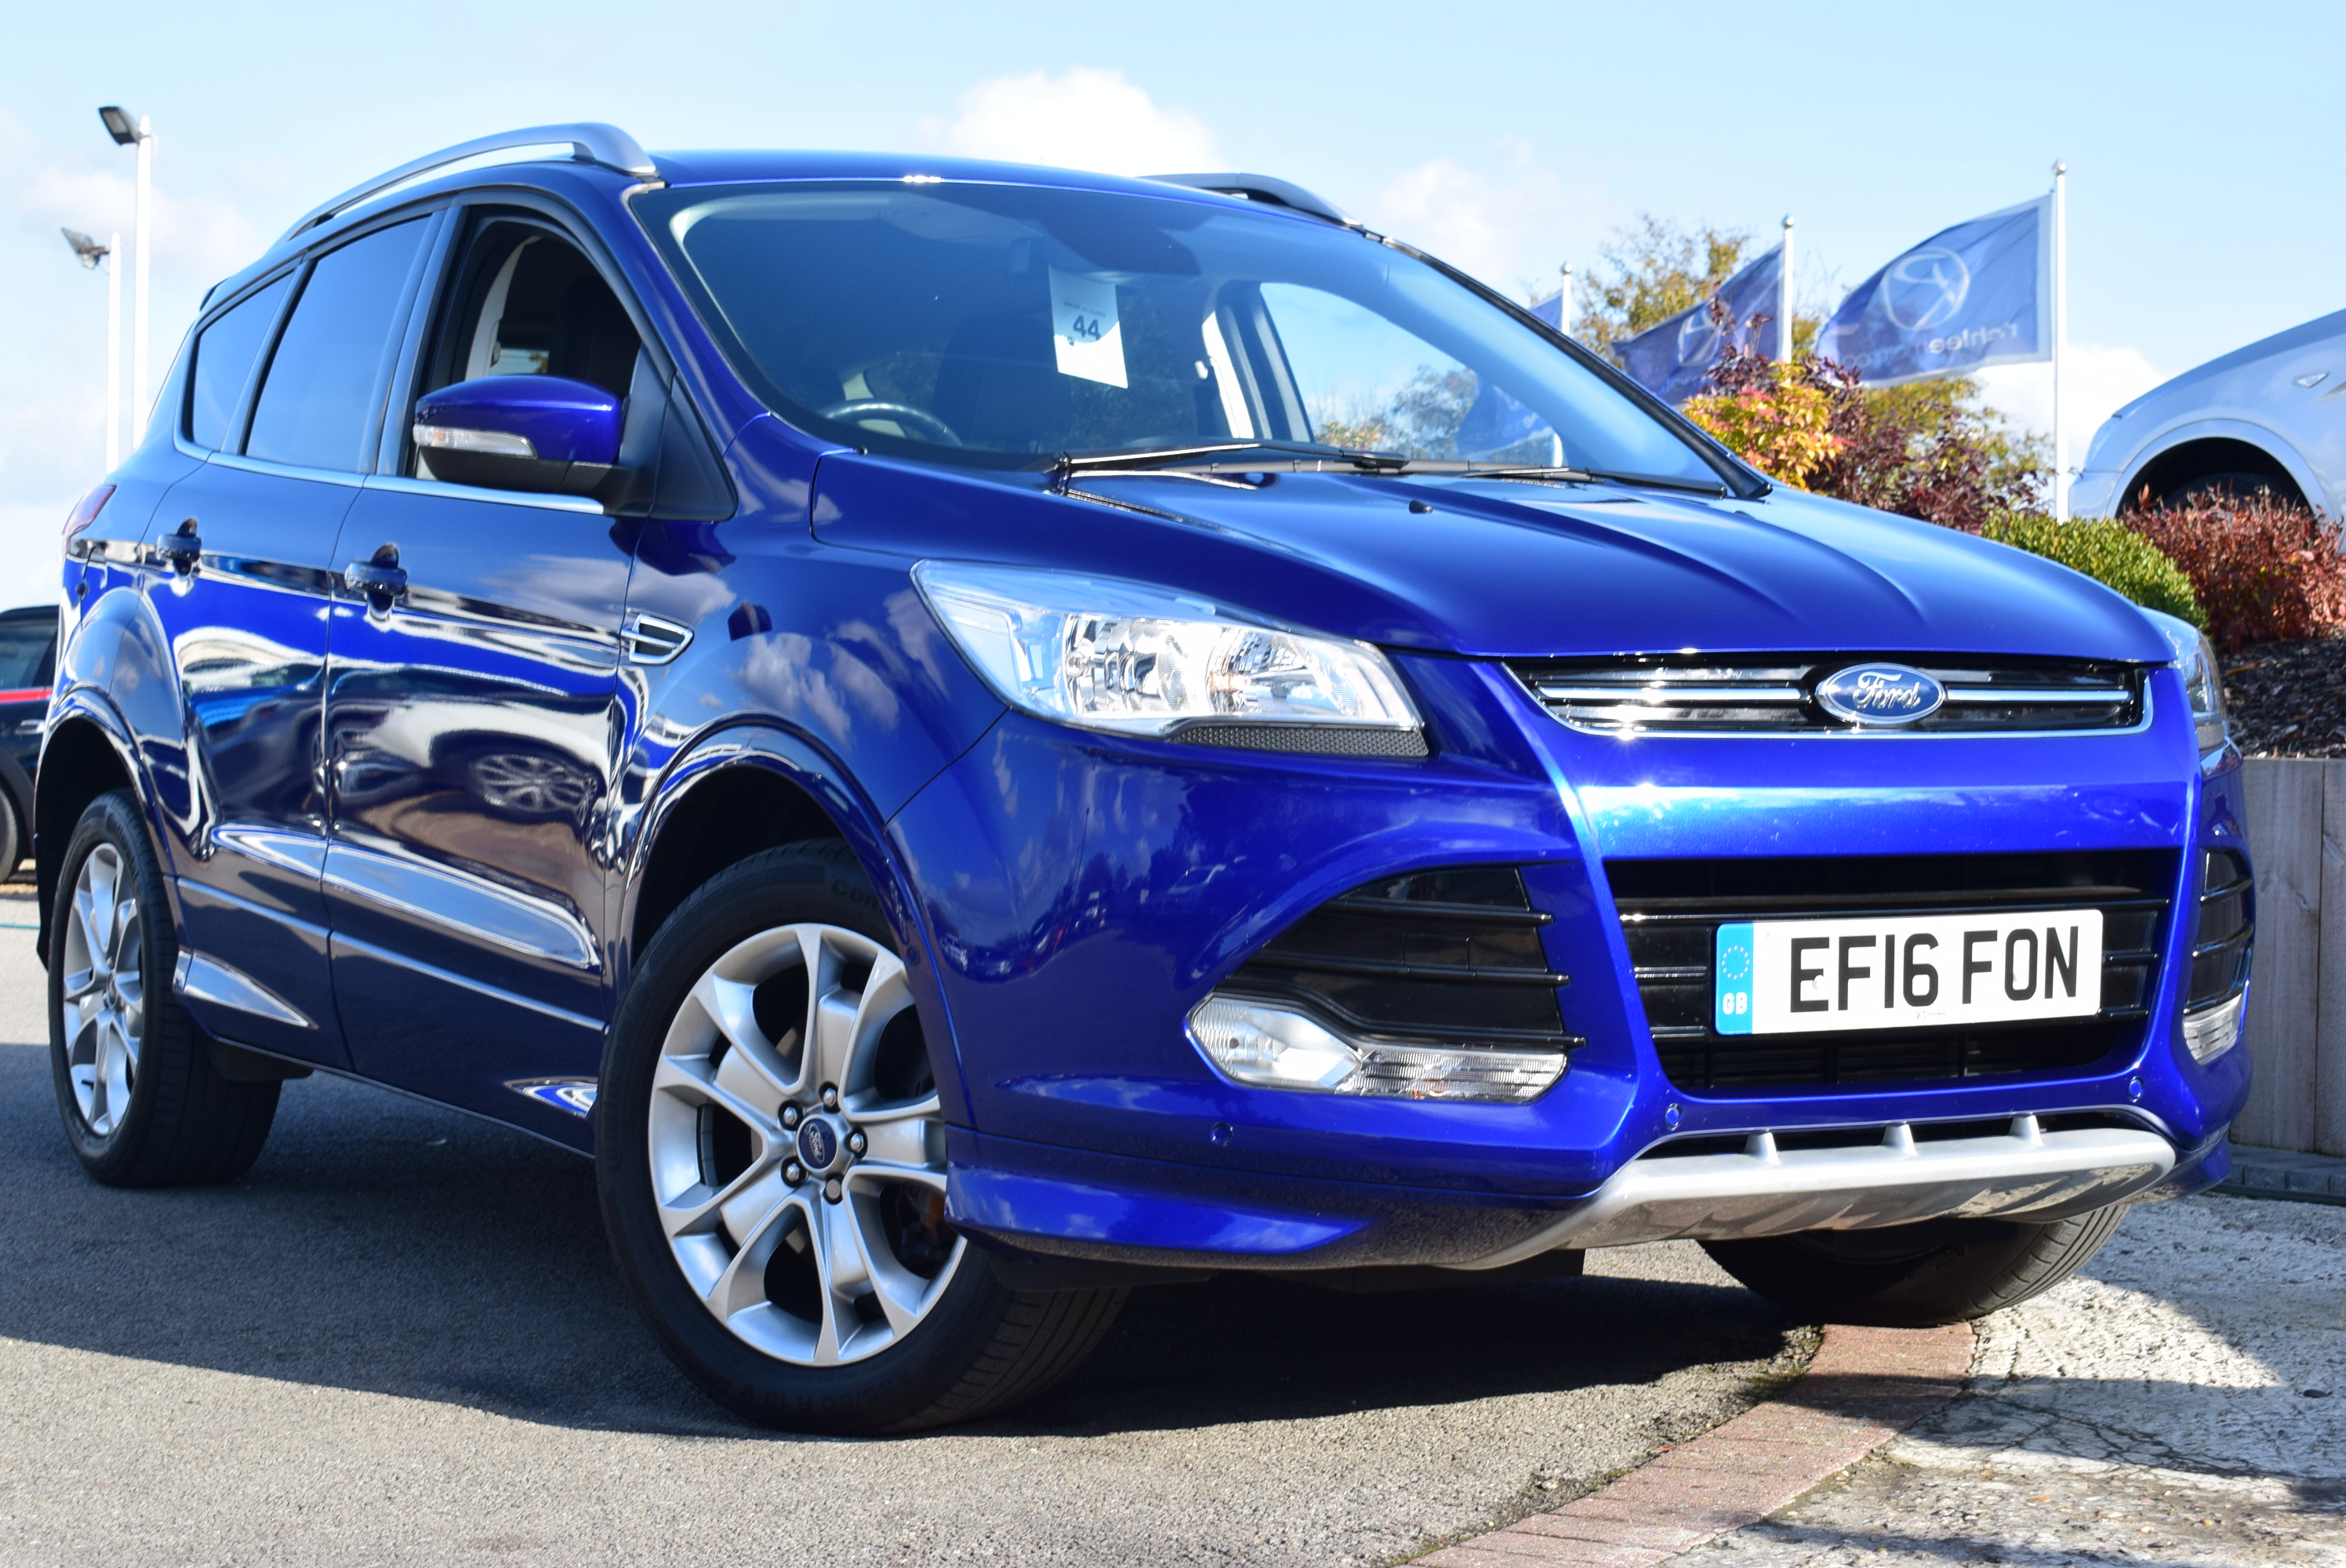 FORD KUGA 2.0 TDCi 150 Titanium Sport 5dr 2WD For Sale